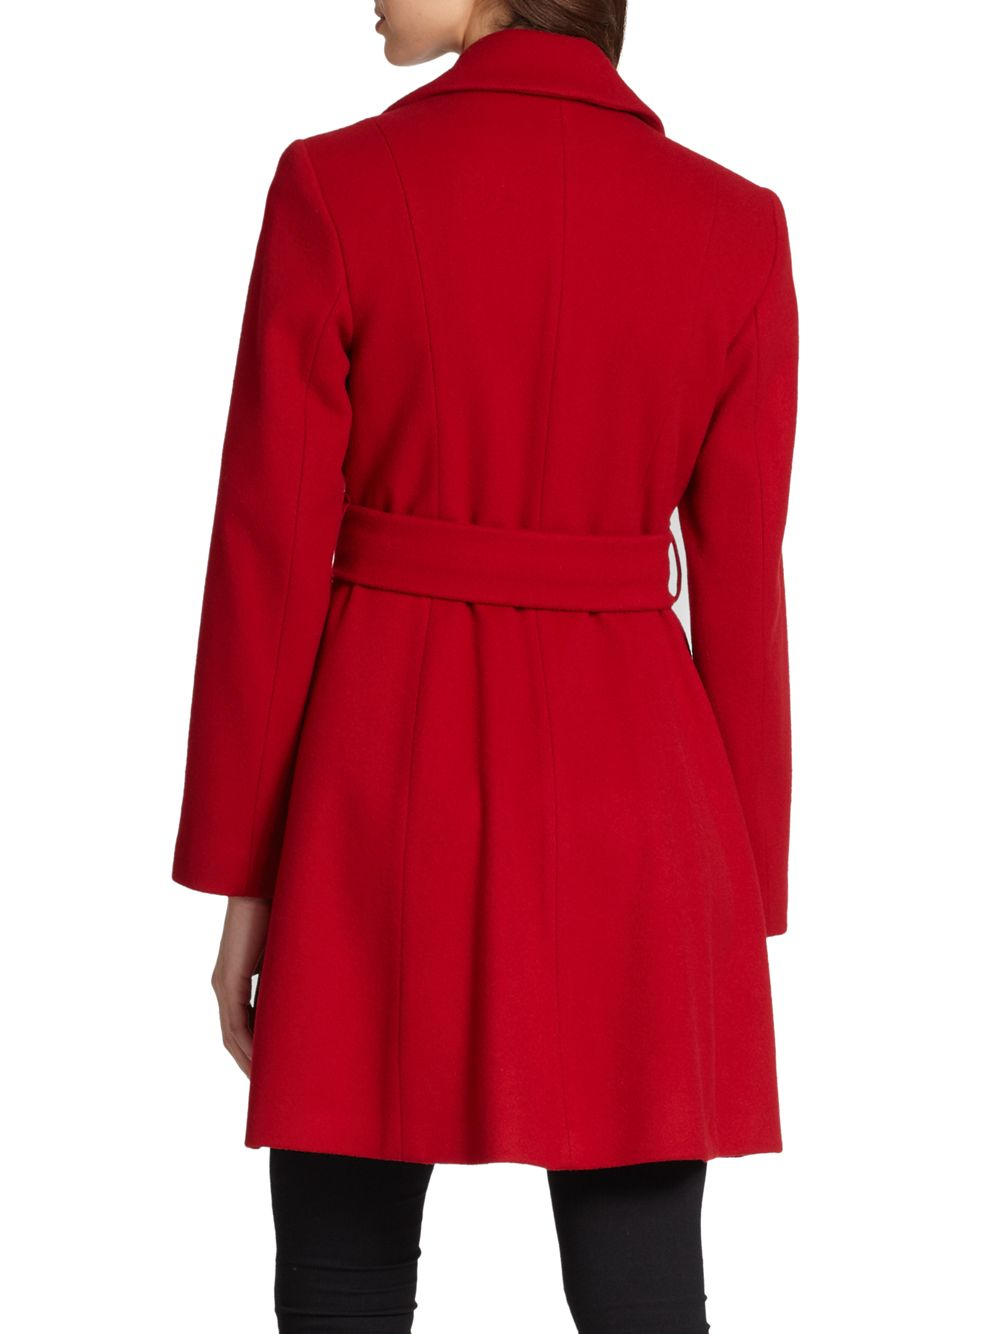 Sofia cashmere Wool Cashmere Belted Coat in Red | Lyst